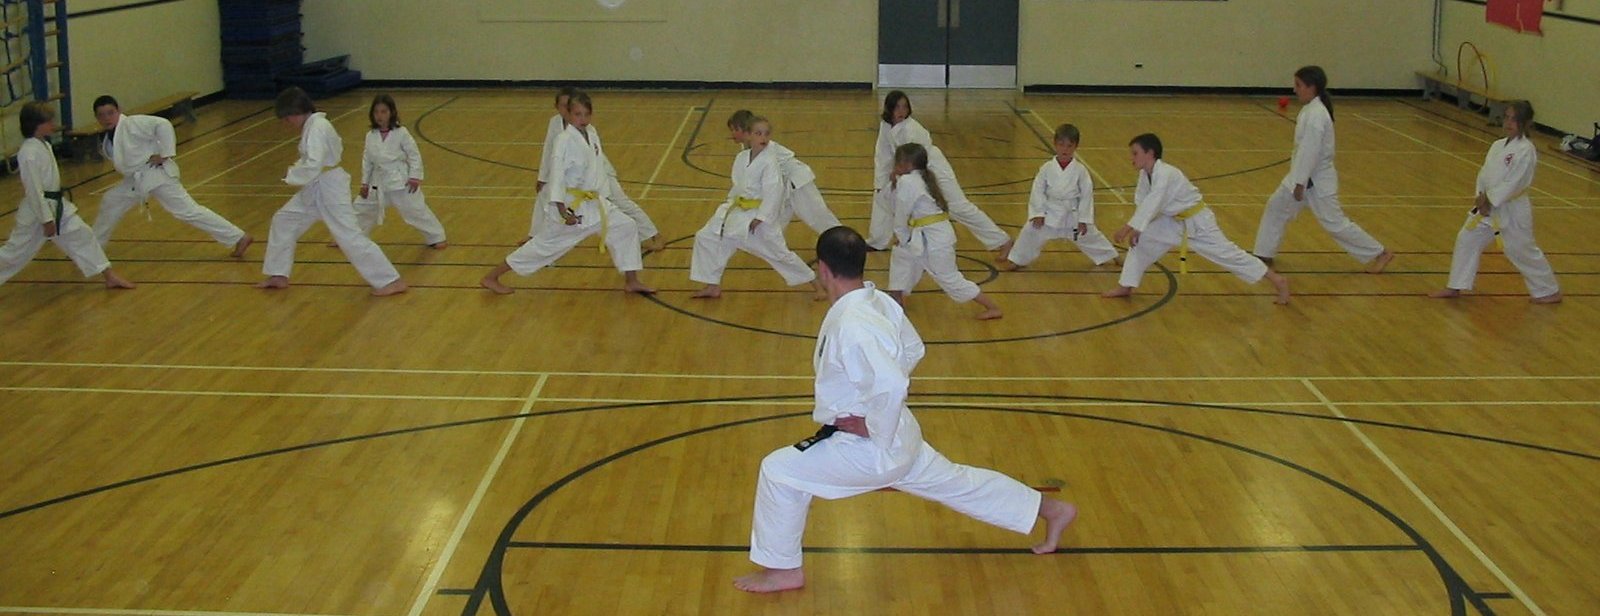 A picture of a karate class